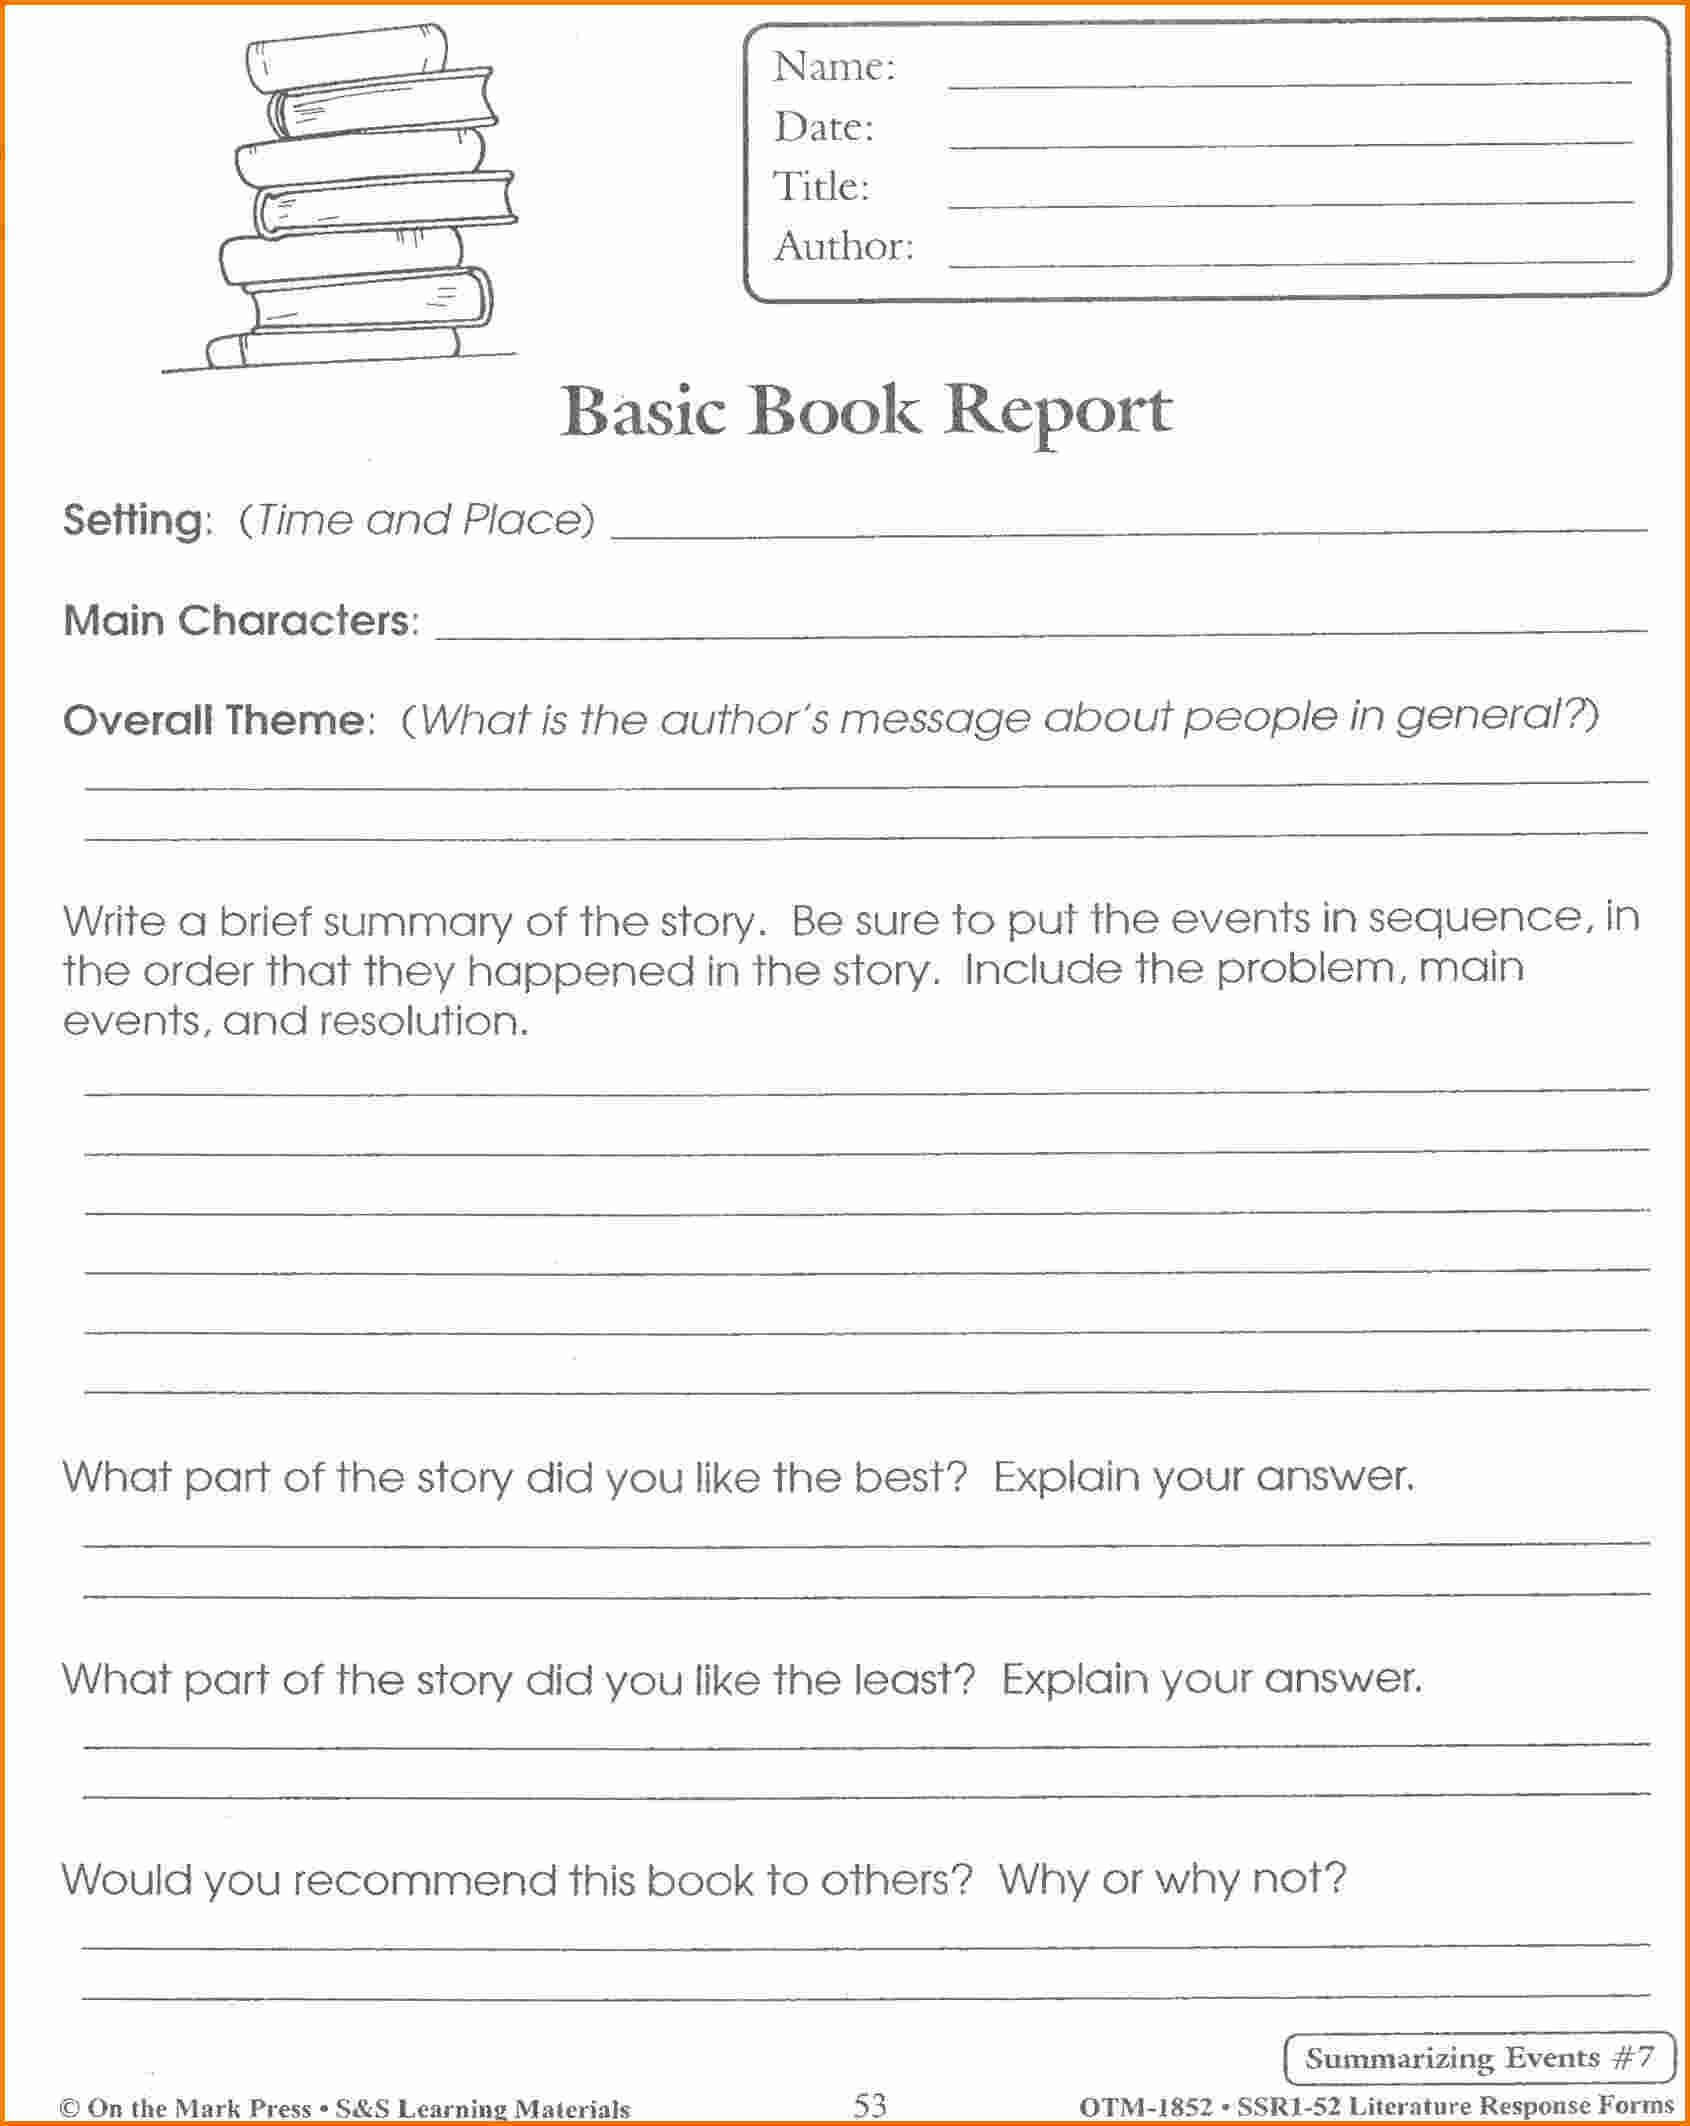 Pinmarcus Tong On Book | Book Report Templates, Book In 4Th Grade Book Report Template